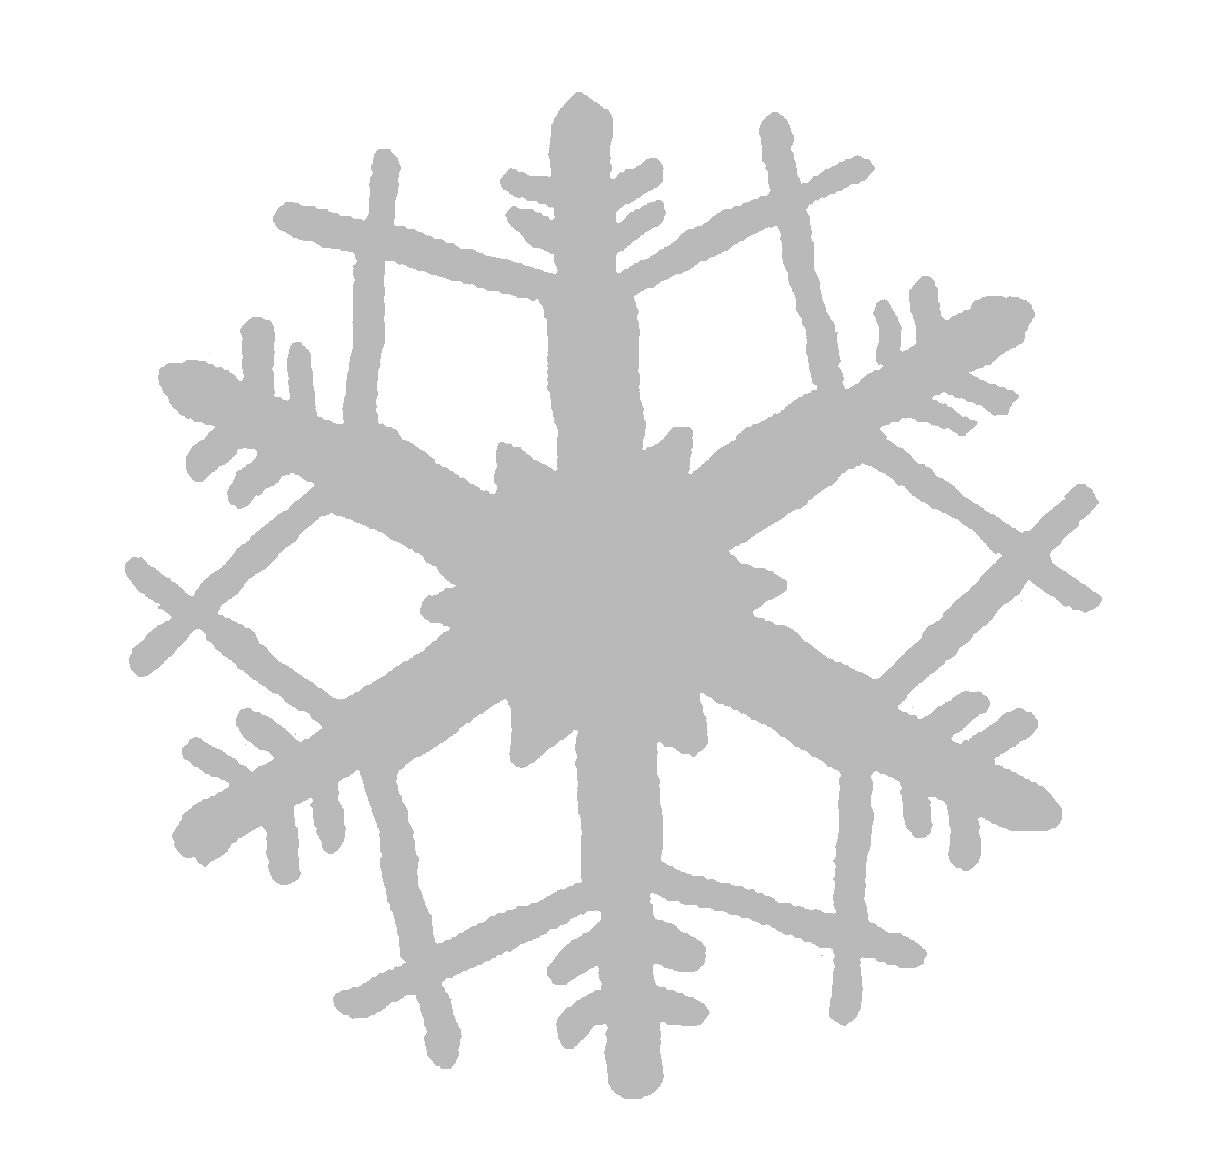 The Graphics Monarch: Digital Snowflake Silhouette Downloads Grayscale Christmas Clip Art1224 x 1174